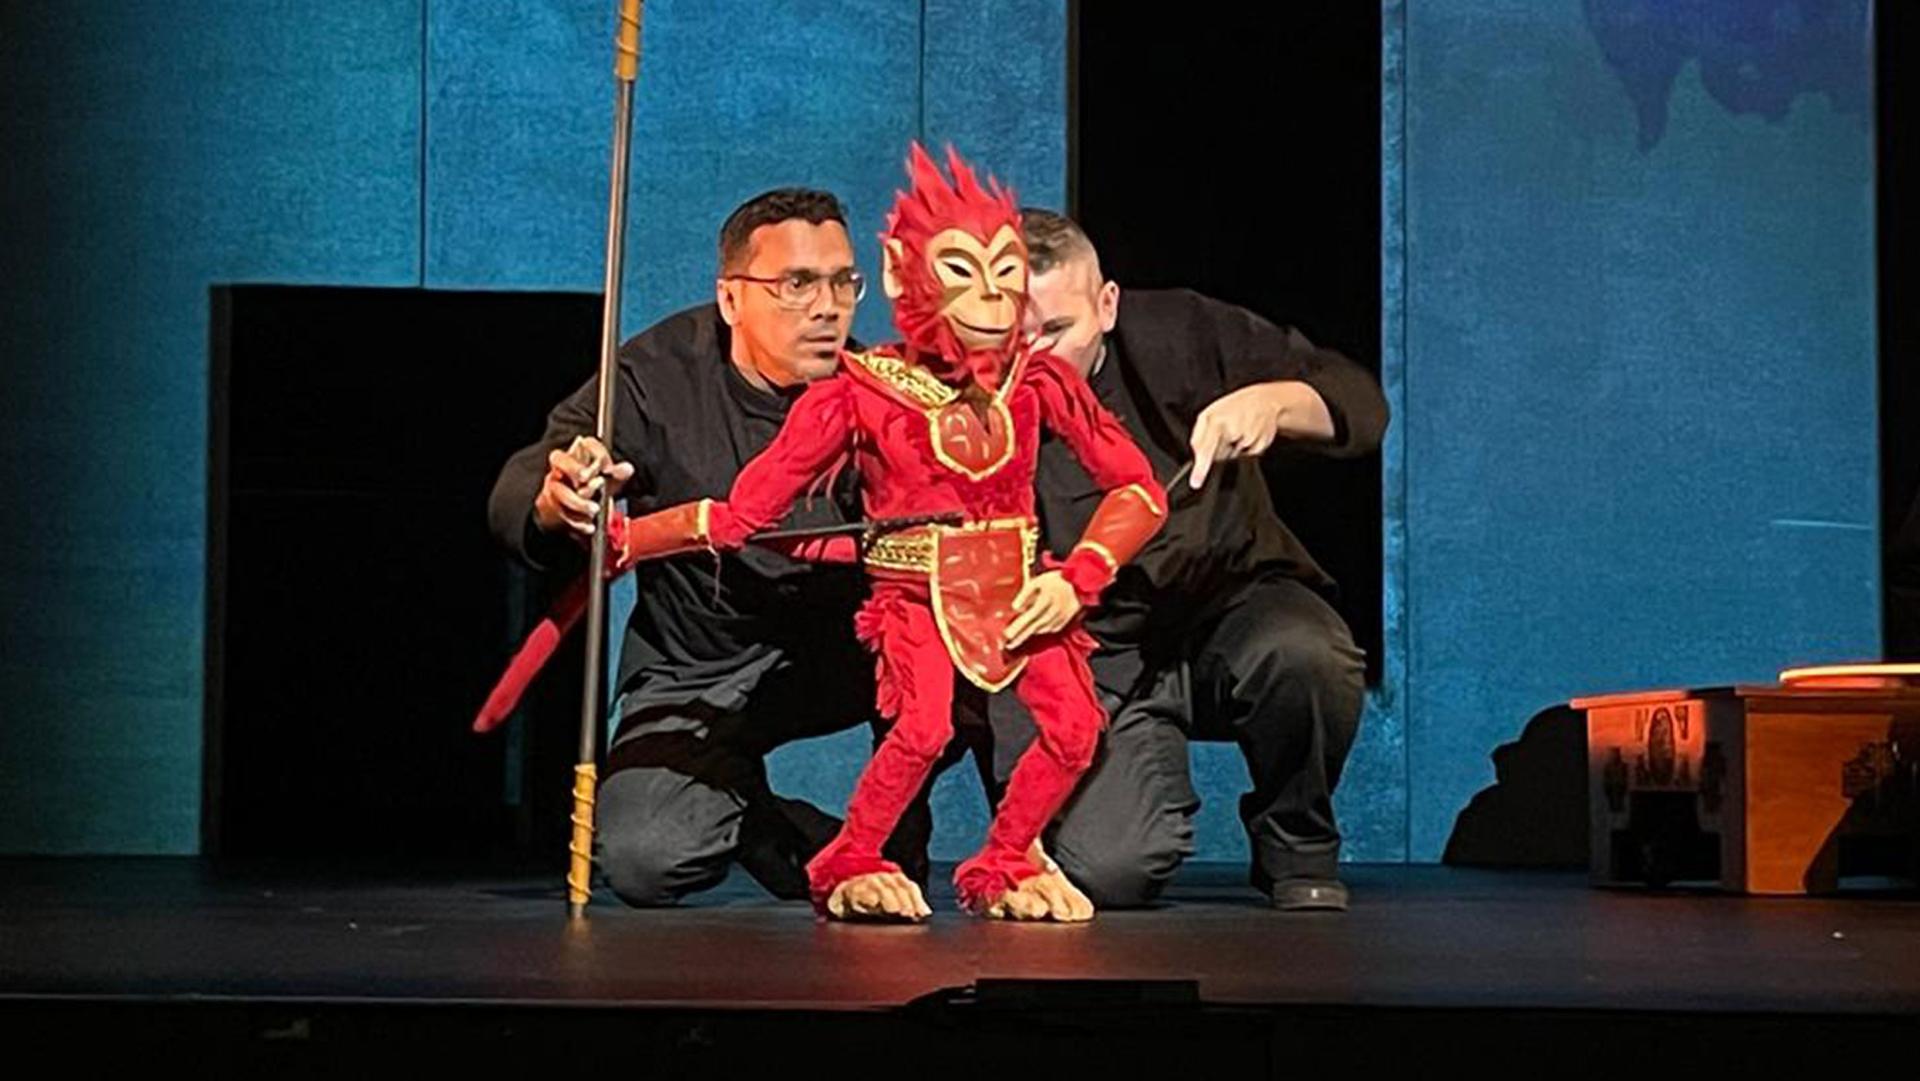 The bunraku style of puppetry in which puppeteers appear on stage and directly work puppets, seen here in 